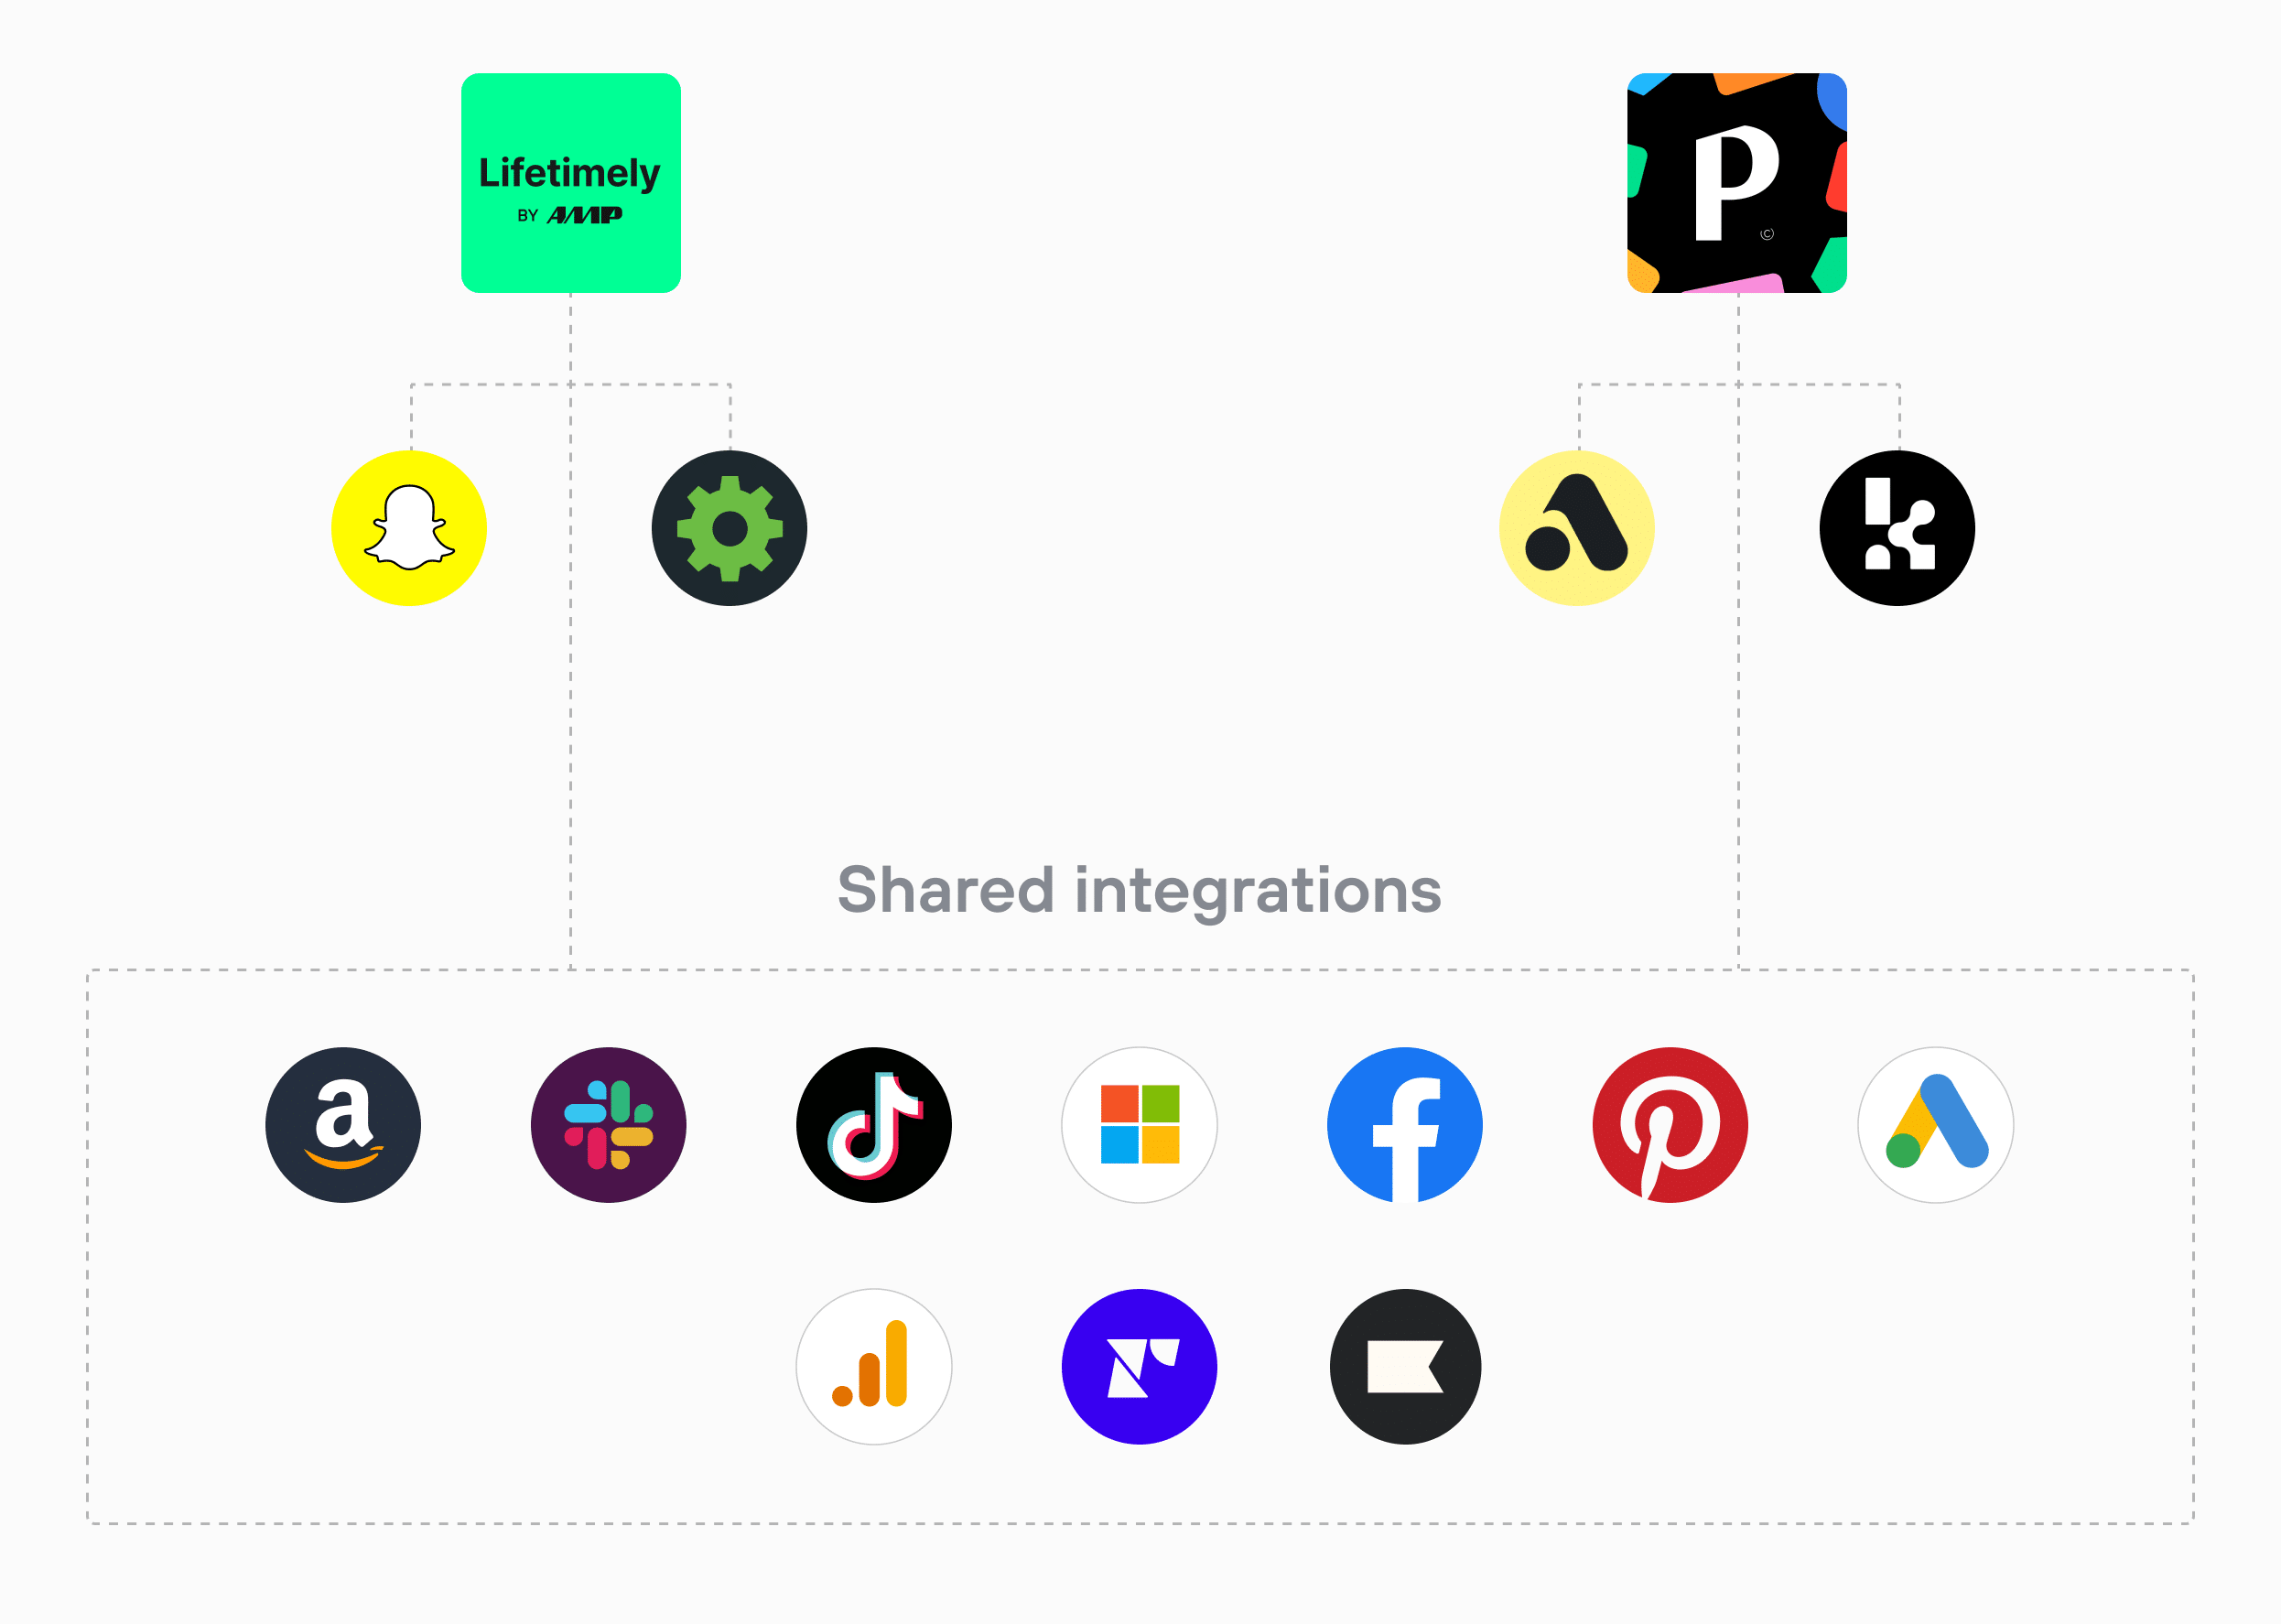 Lifetimely vs Peel Insights_shared integrations_web_updated